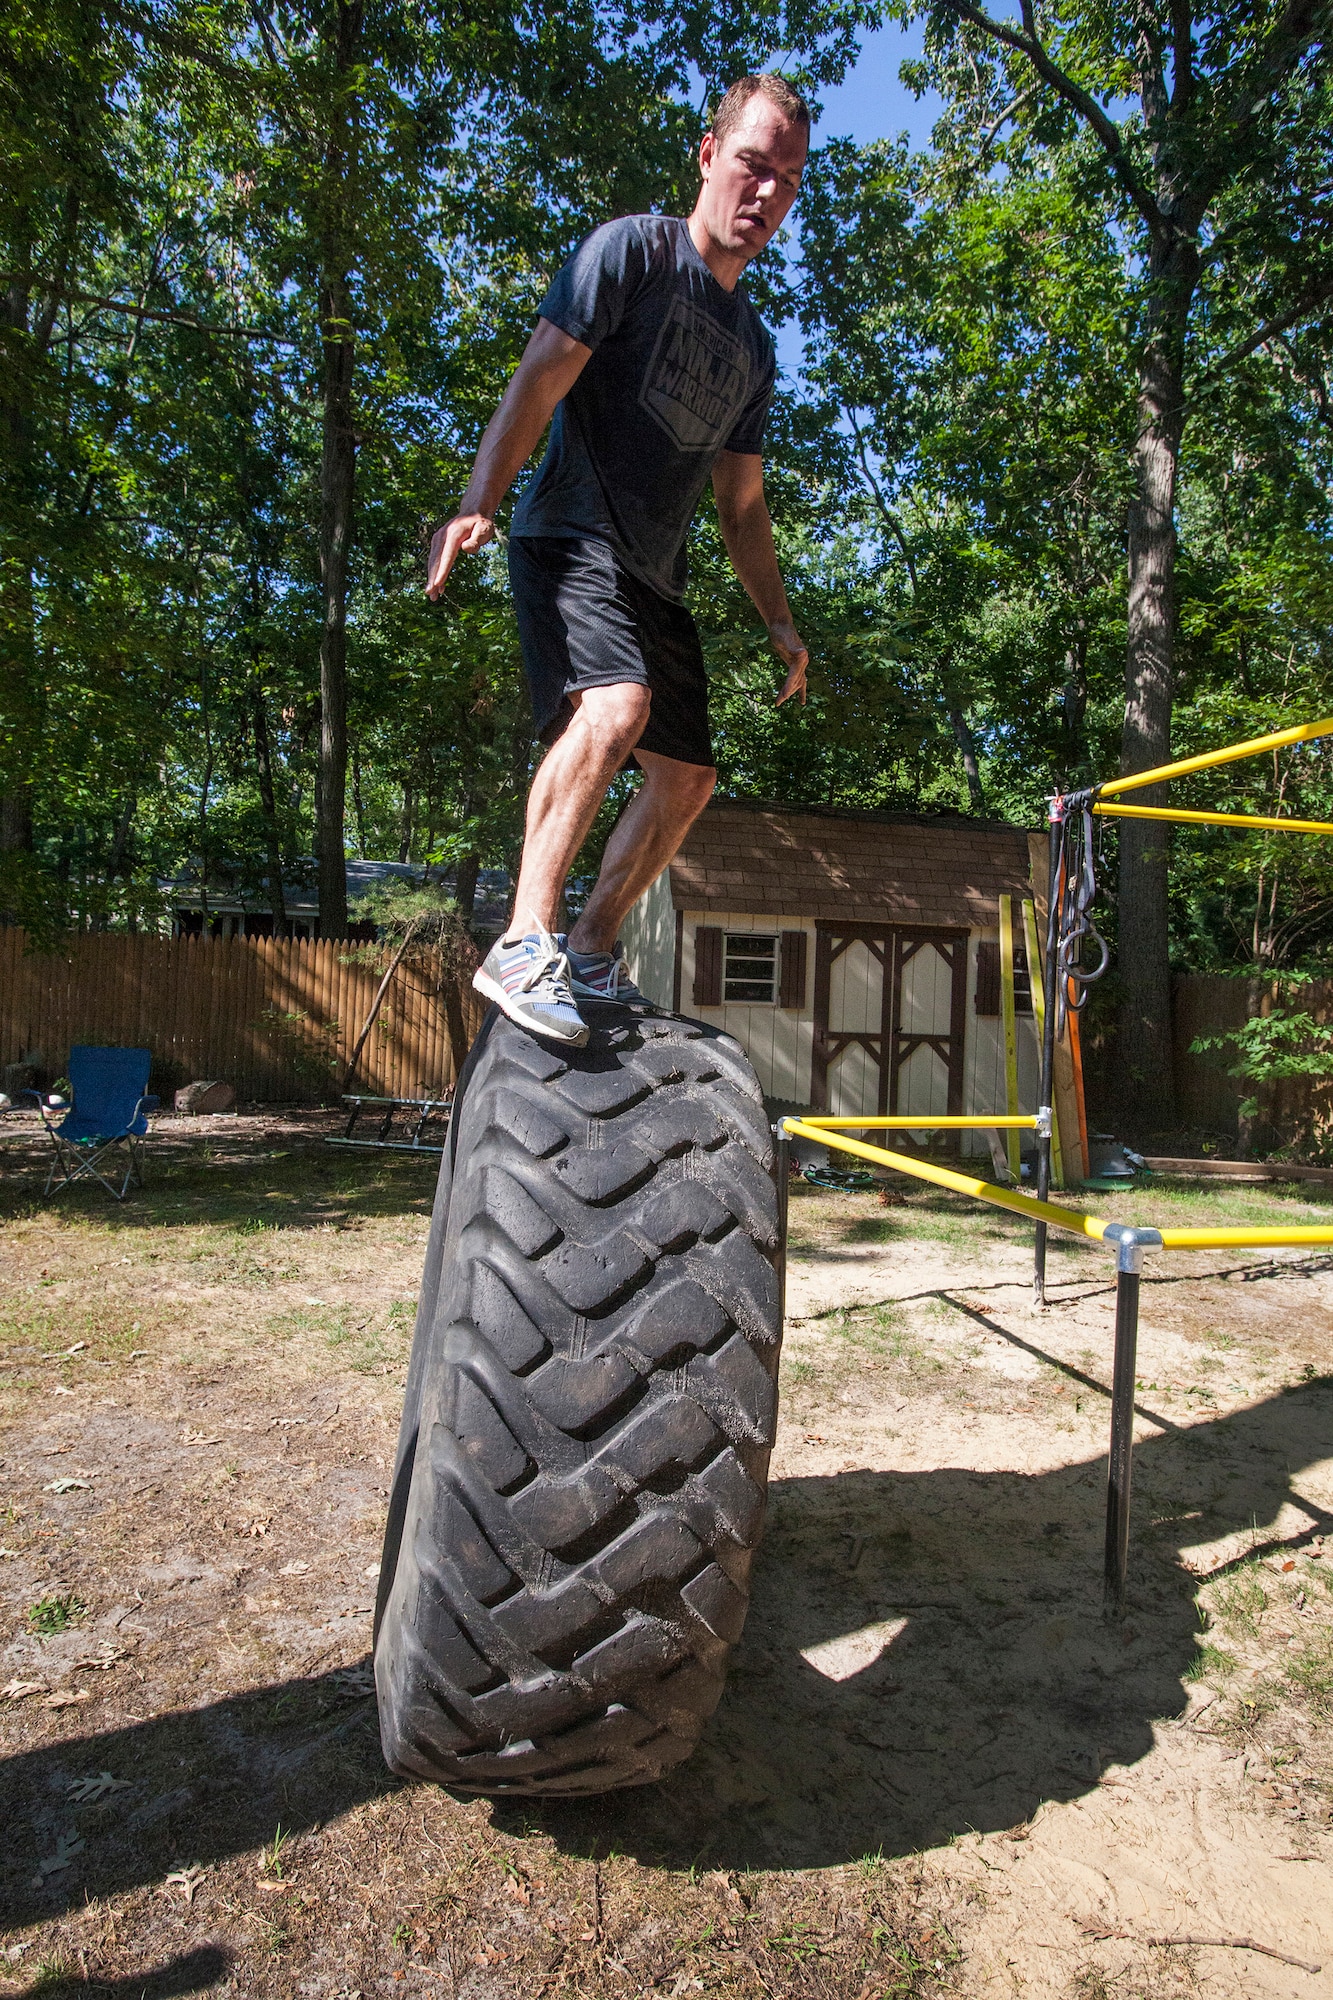 Tech. Sgt. Justin B. Gielski balances on a tire while training to compete on the TV show “American Ninja Warrior” in the backyard of his home in Medford, N.J., Aug. 21, 2015. Gielski placed fifth in the all-military city final on the TV show and advanced to the finals in Las Vegas. Gielski is a loadmaster with the 150th Special Operations Squadron, 108th Wing, New Jersey Air National Guard, located at Joint Base McGuire-Dix-Lakehurst, N.J. (U.S. Air National Guard photo by Master Sgt. Mark C. Olsen/Released)